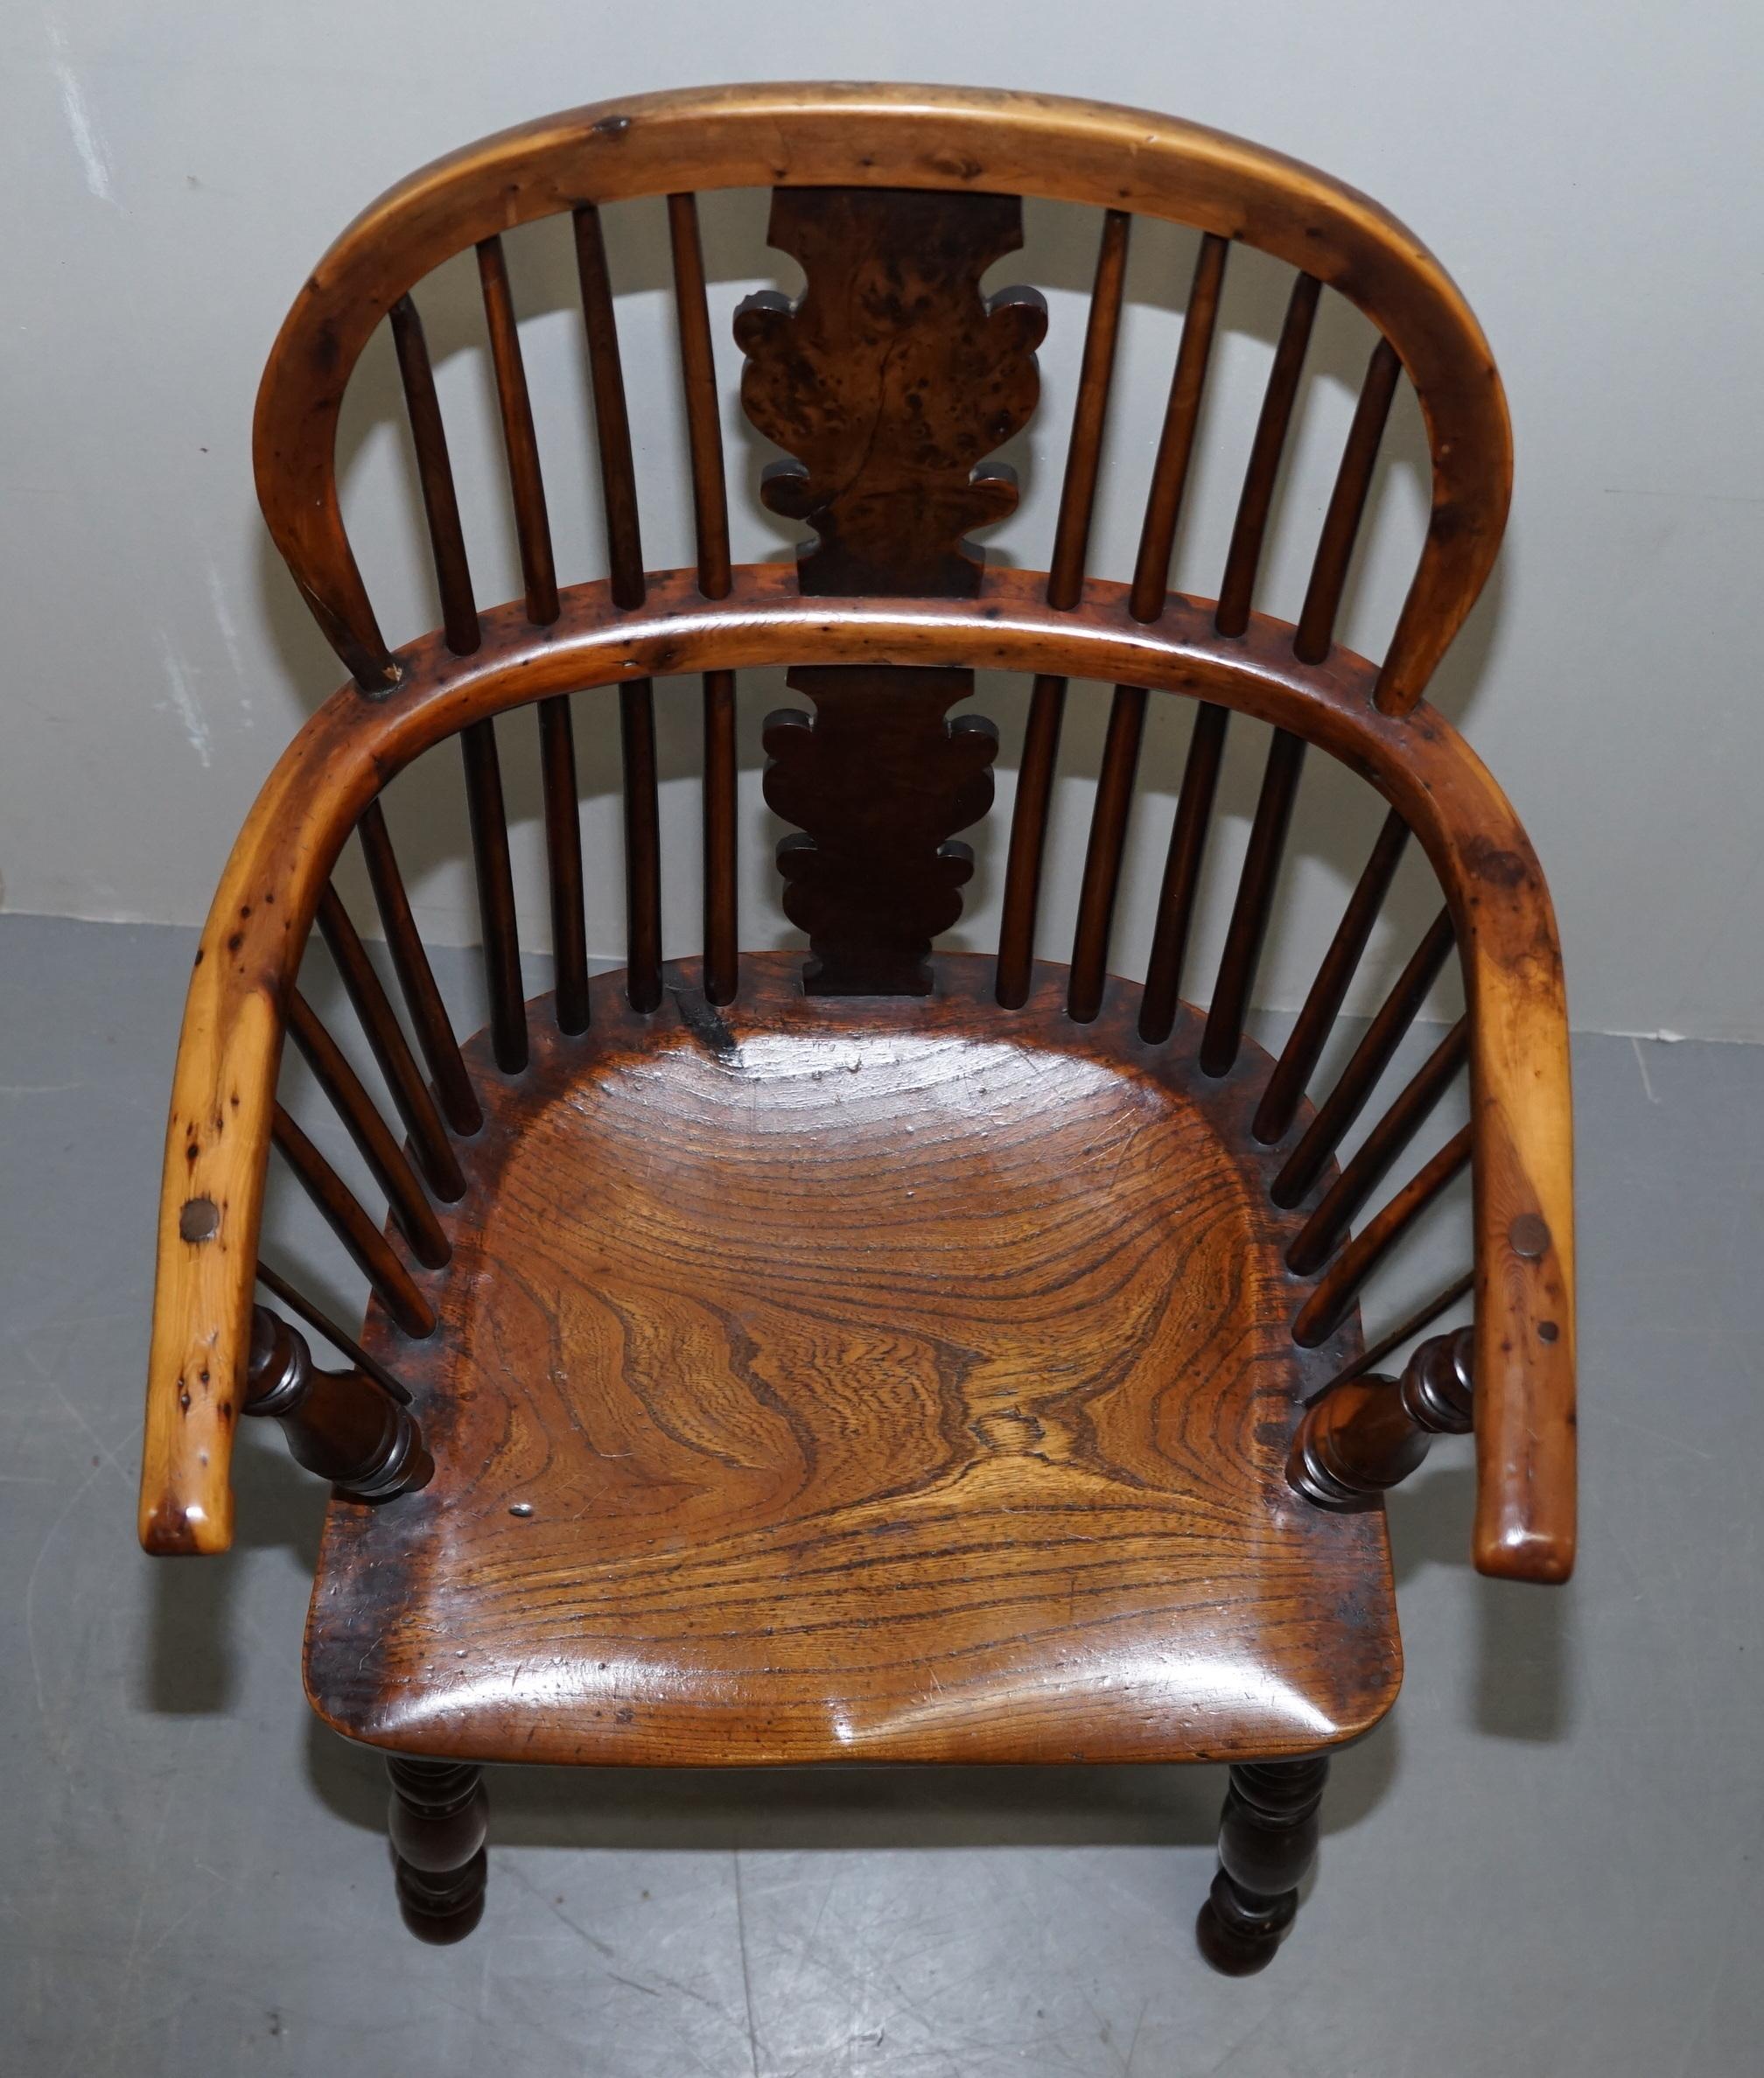 1 of 6 Burr Yew Wood & Elm Windsor Armchairs circa 1860 English Country House For Sale 3